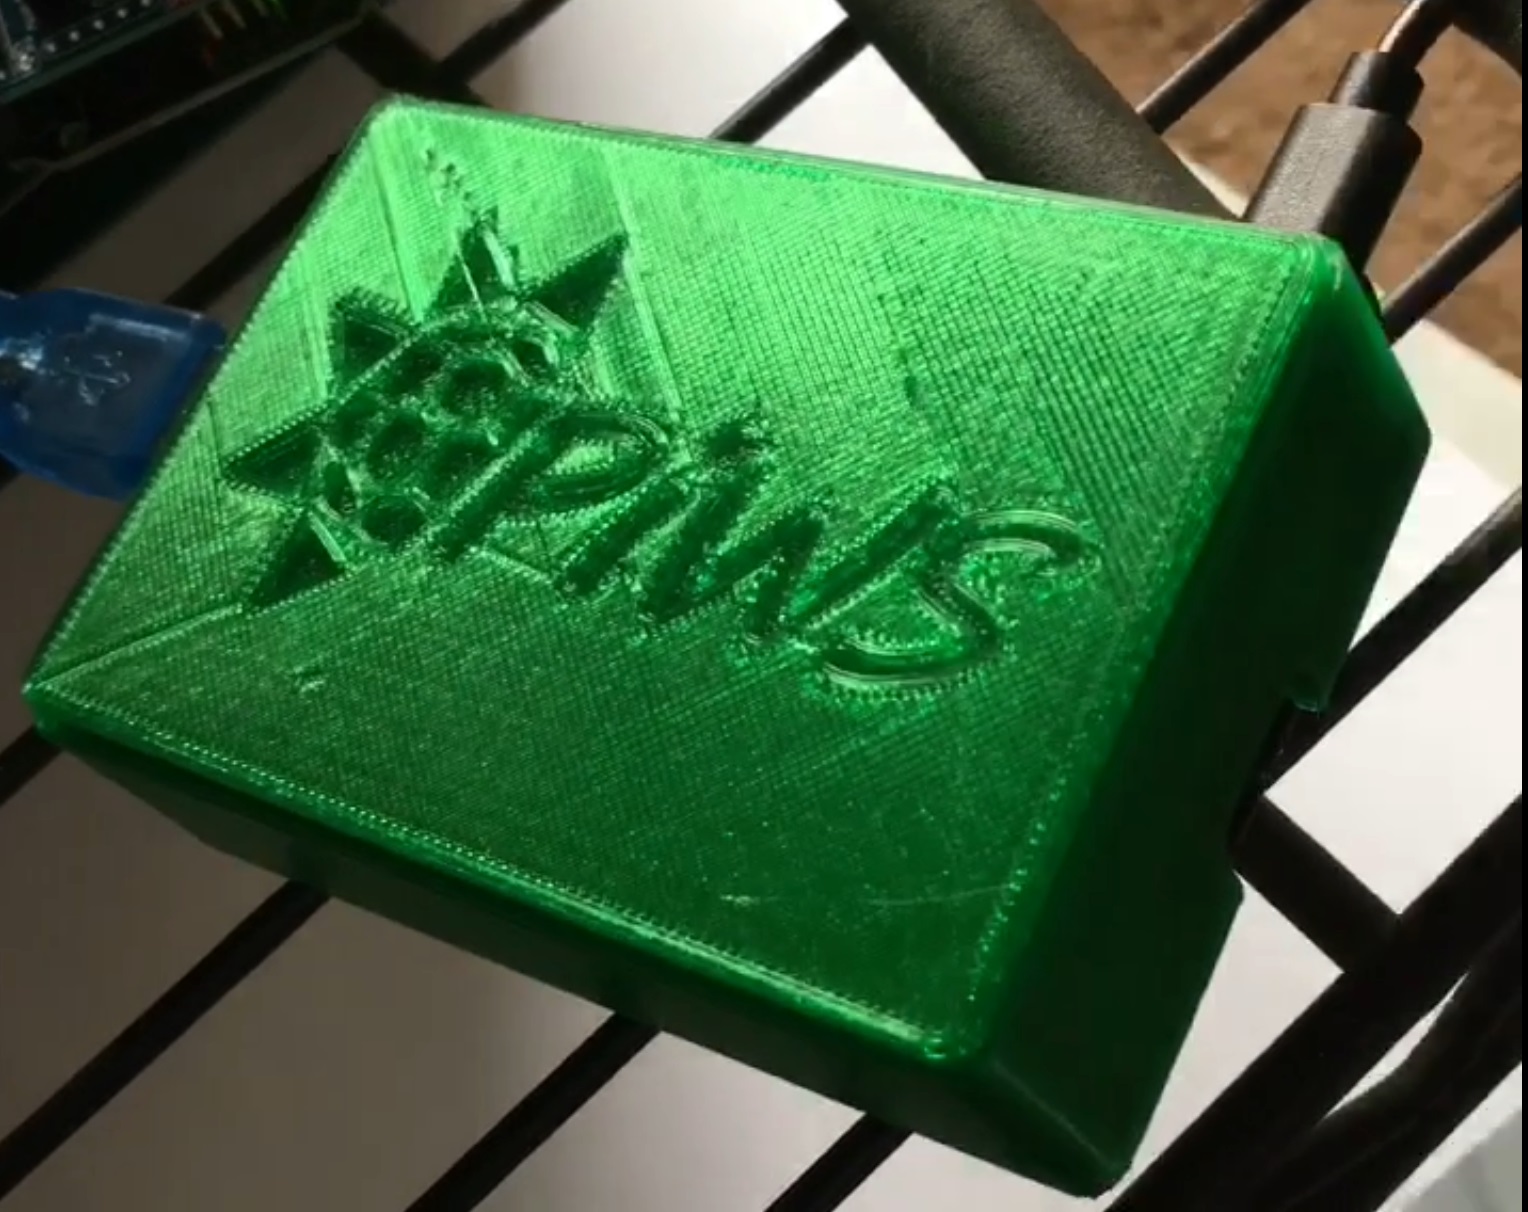 Picture of an early version of the 3D printed PiWS enclosure, translucent green in color.